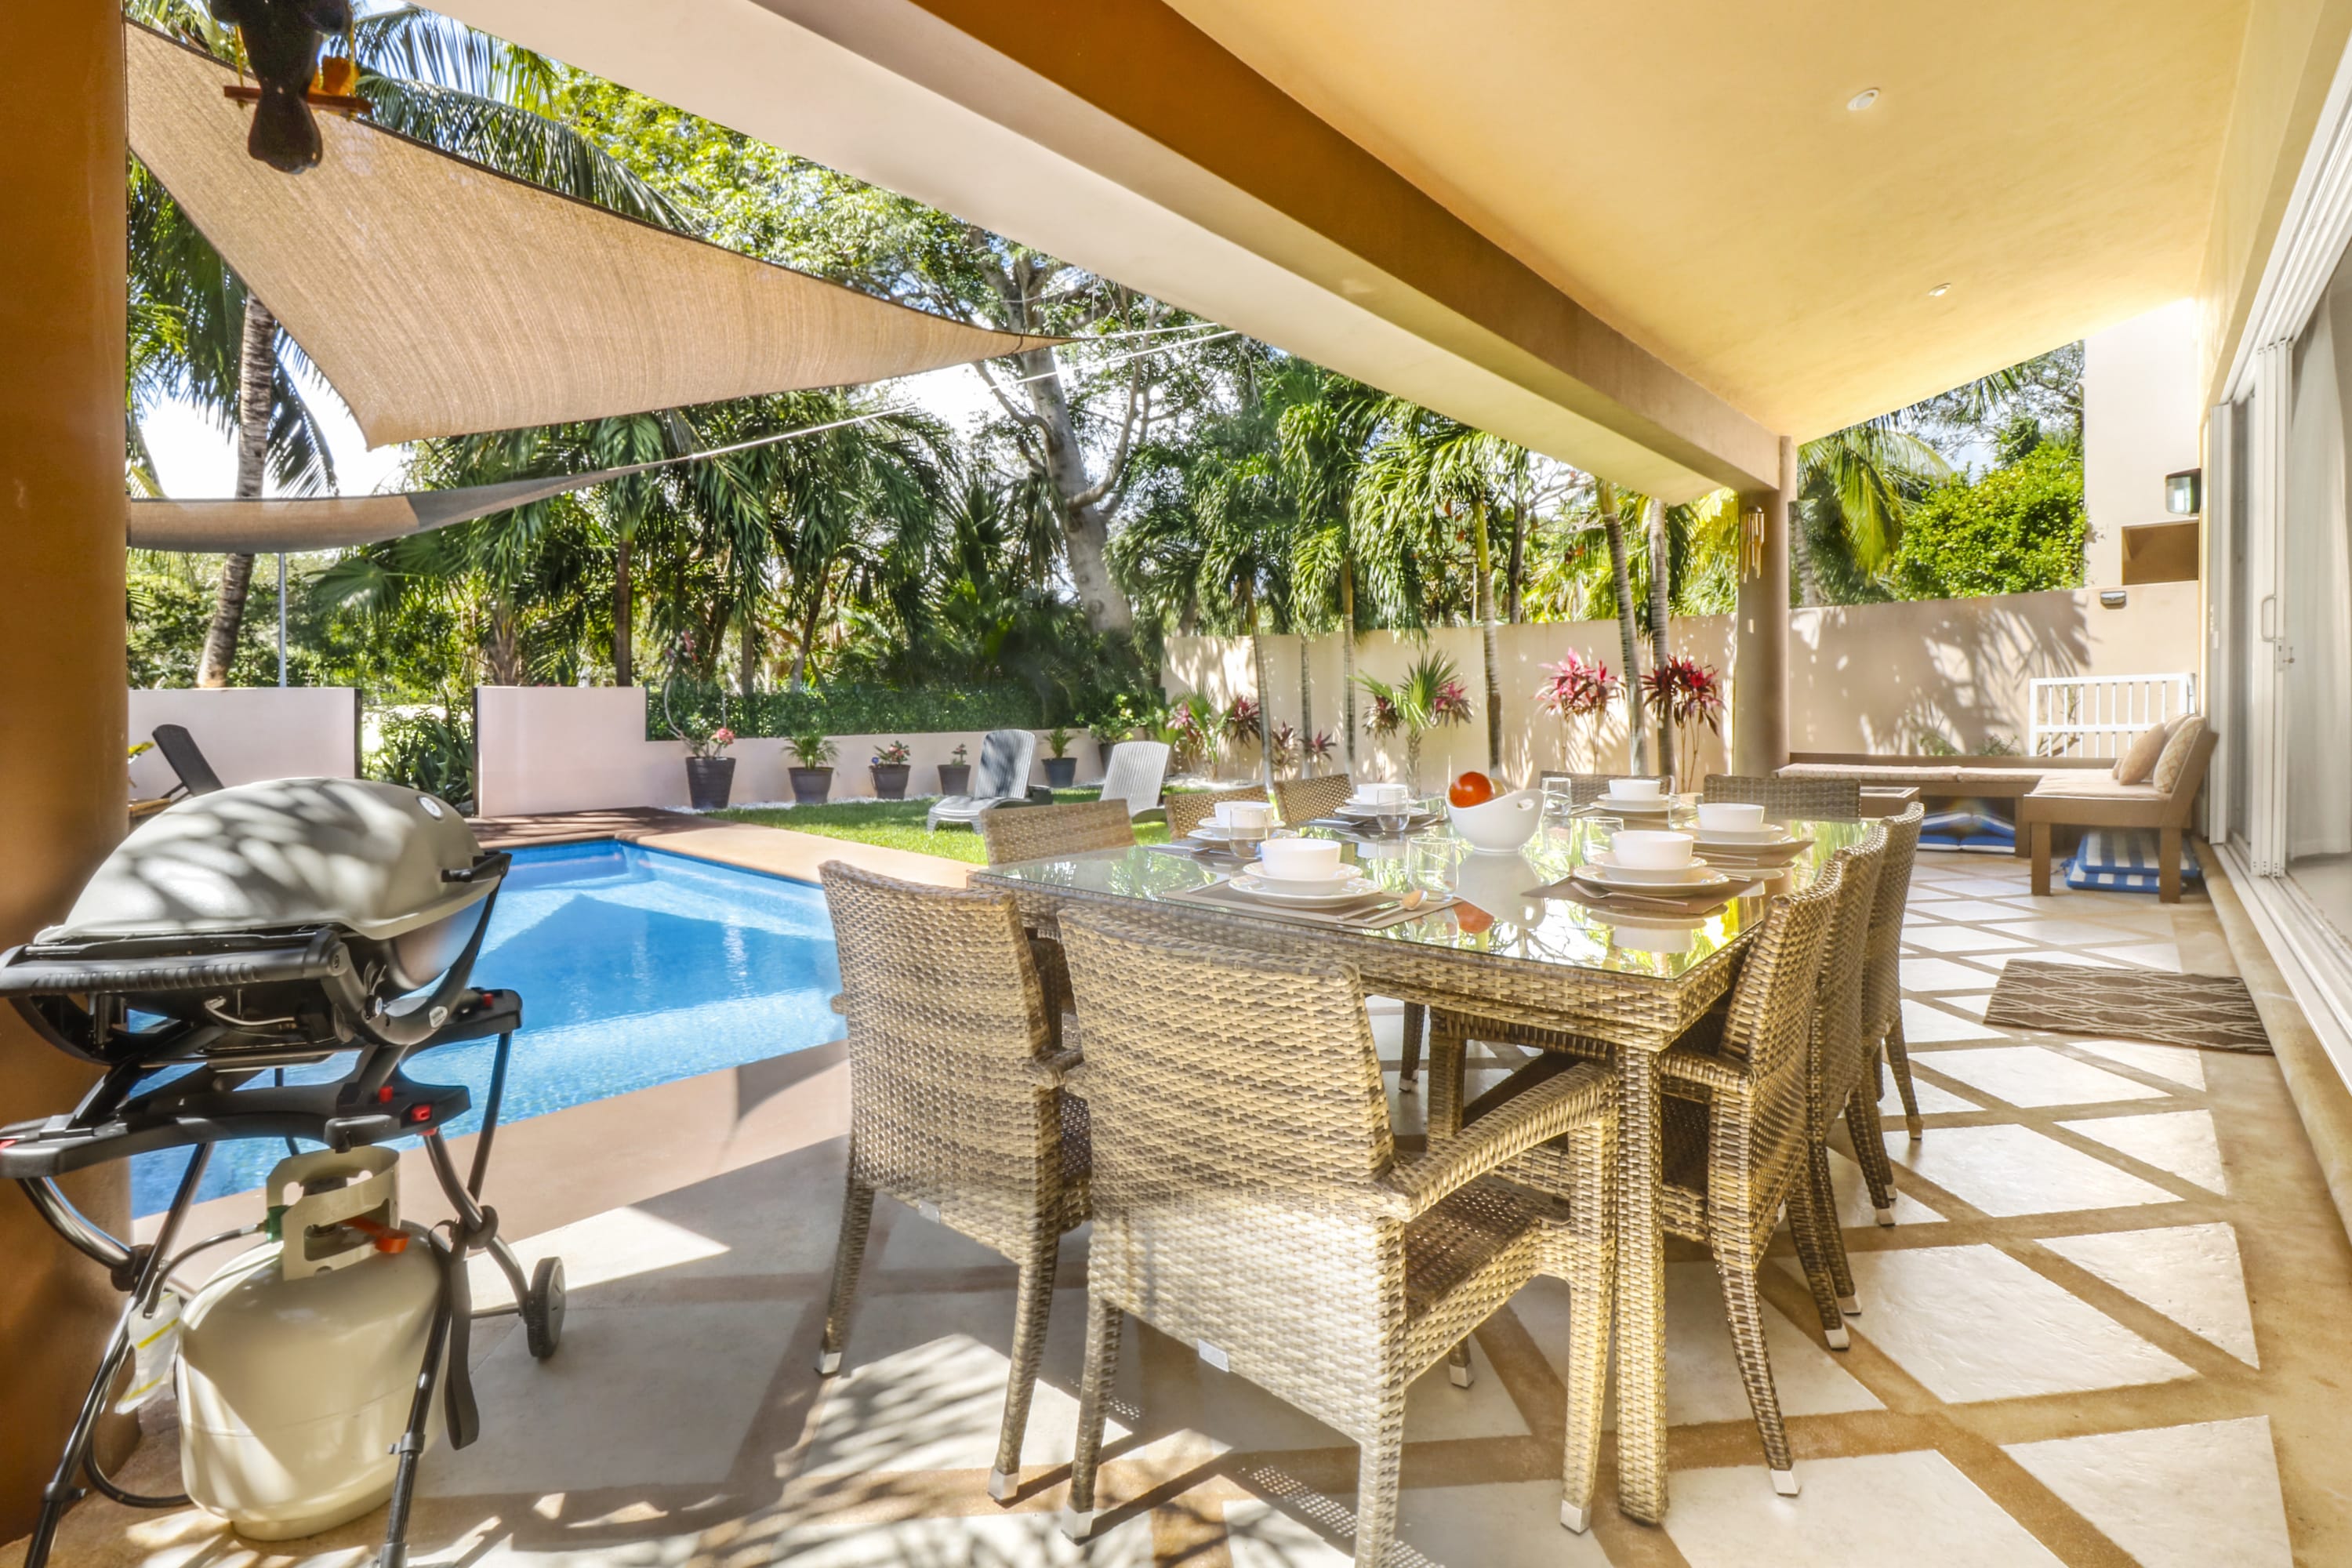 Property Image 1 - Perfect Stay! Renovated Pool! Private 4BR Villa.